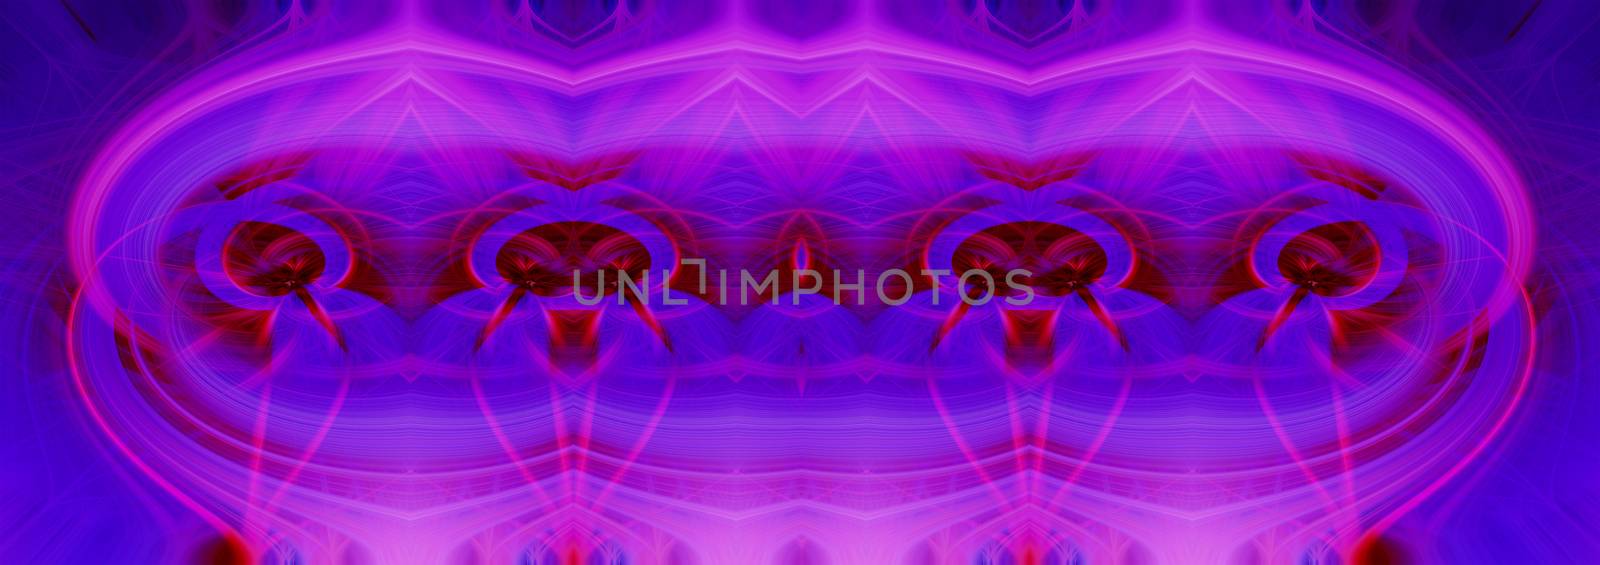 Beautiful abstract intertwined 3d fibers forming a shape of sparkle, flame, flower, interlinked hearts. Blue, maroon, pink, and purple colors. Banner size. Illustration by DamantisZ